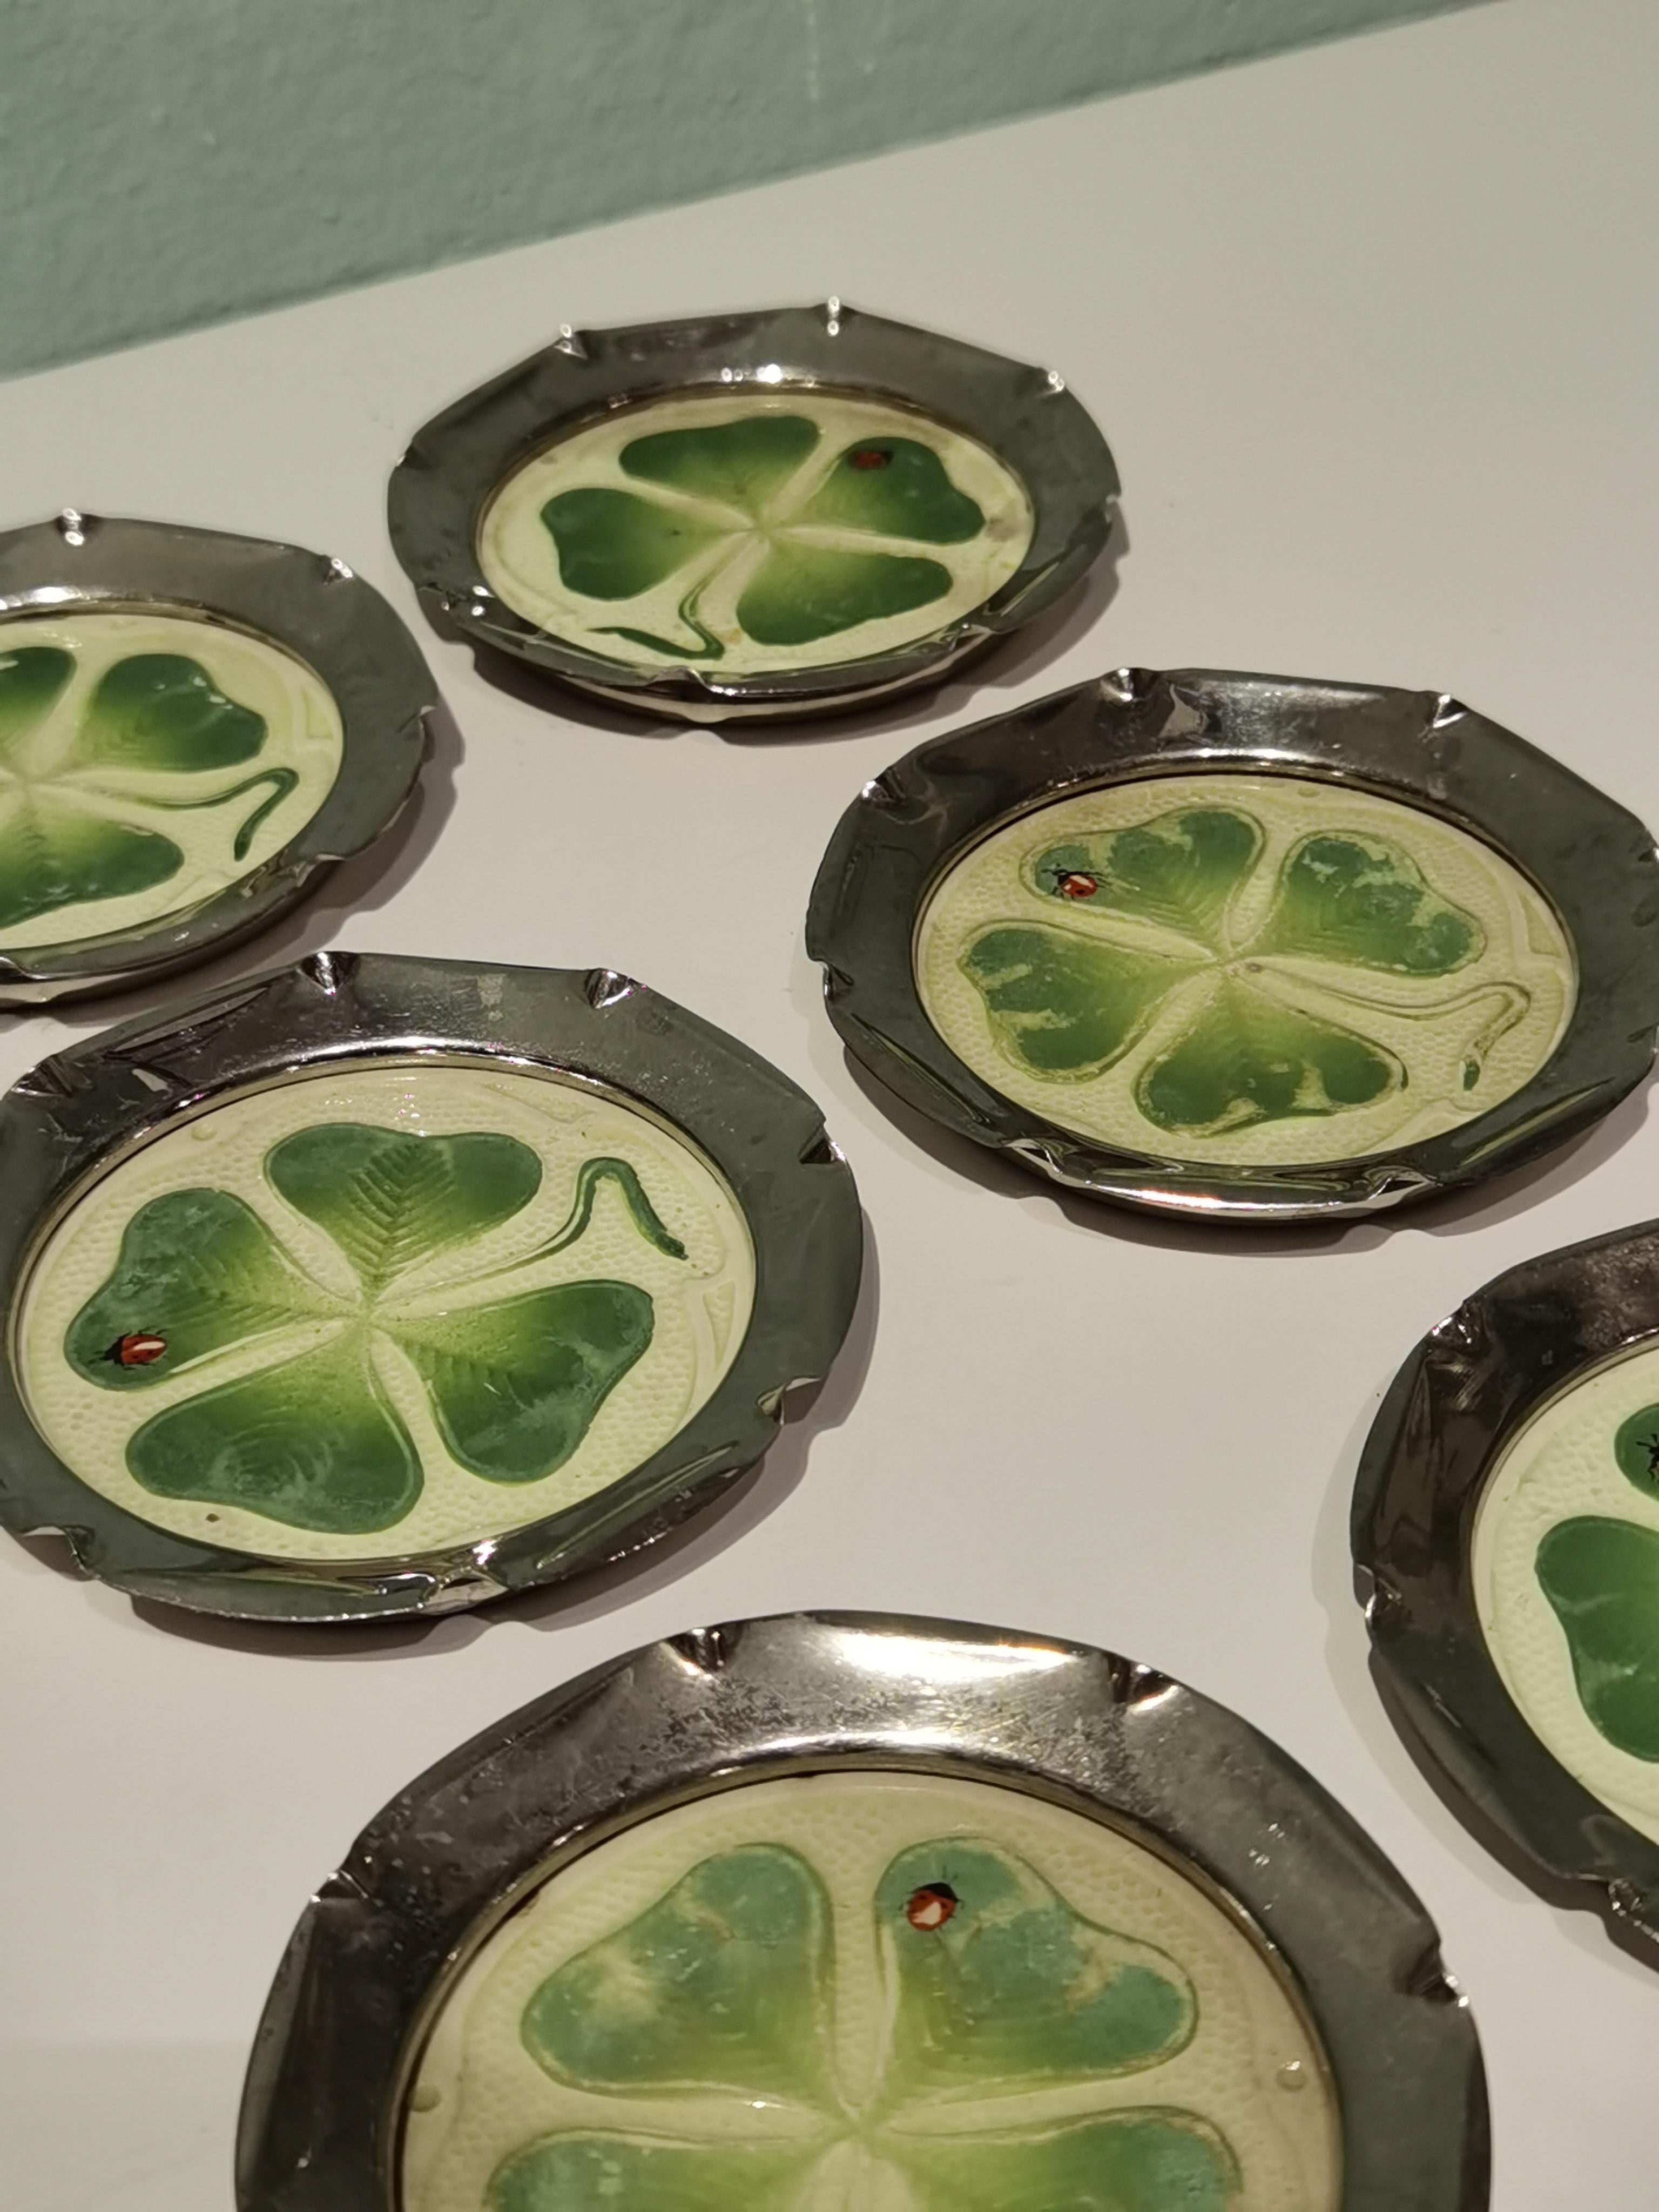 Set of six coasters with enameled four-leaf clover in green on cream white pottery.
Metal framed in the style of Art Nouveau. Backside pattern numbers and initials. Made in Germany.